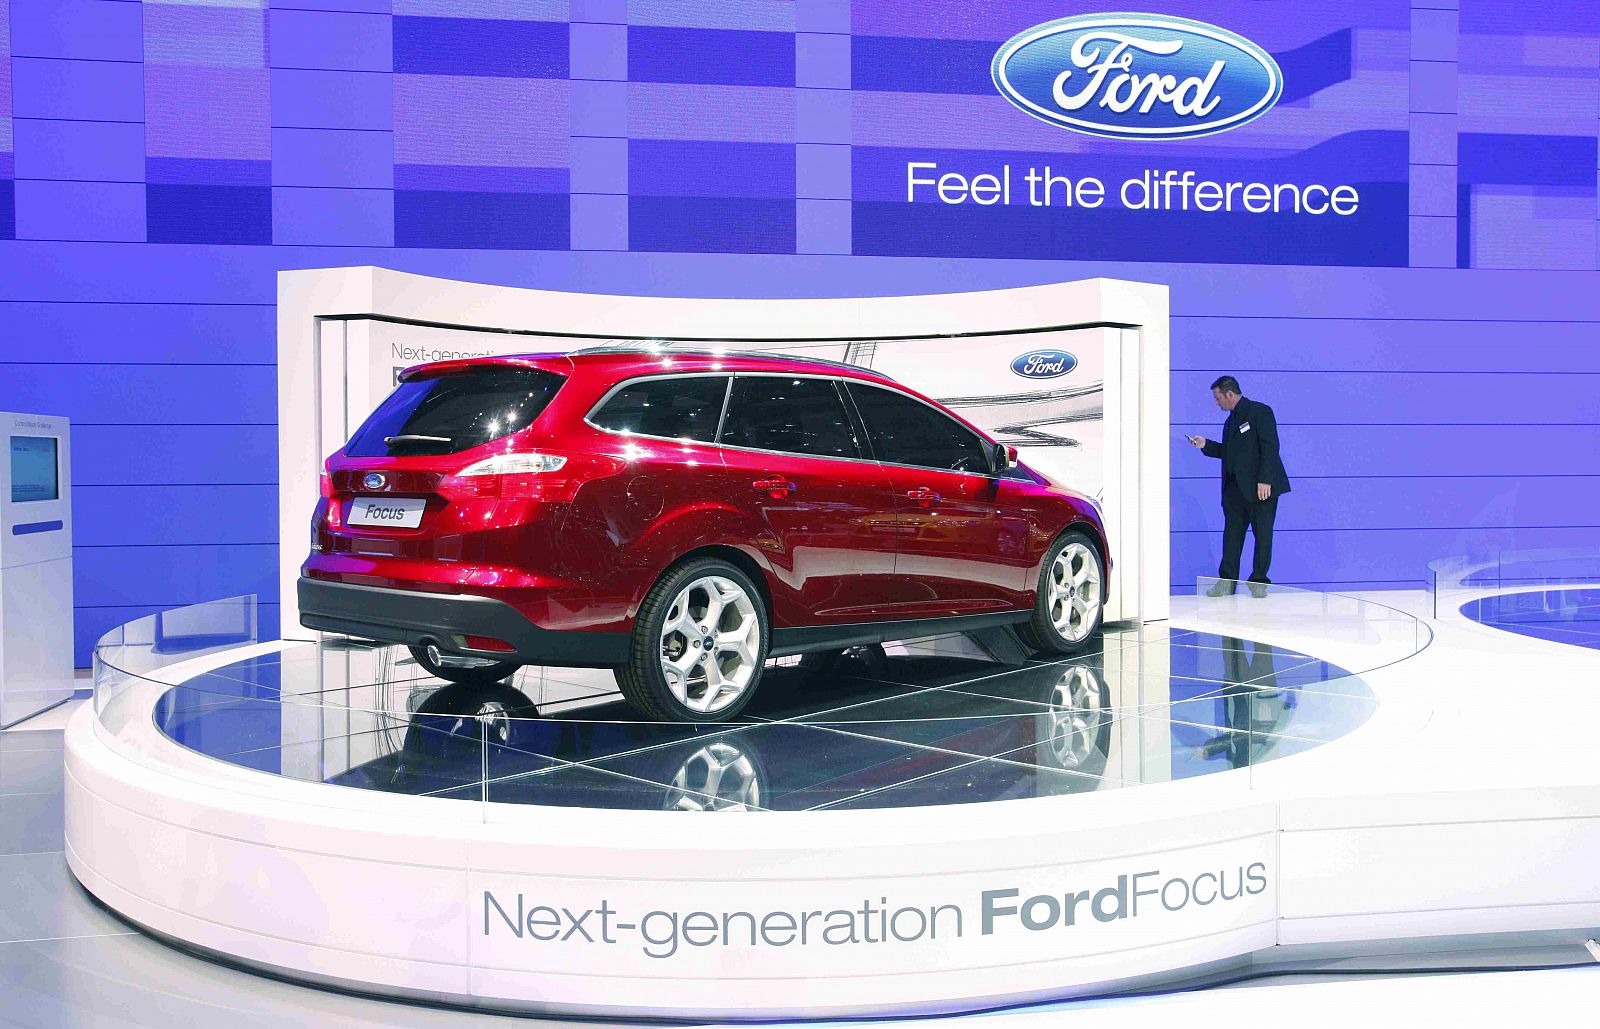 The new Ford Focus car is displayed on the exhibition stand of Ford during the 80th Geneva Car Show